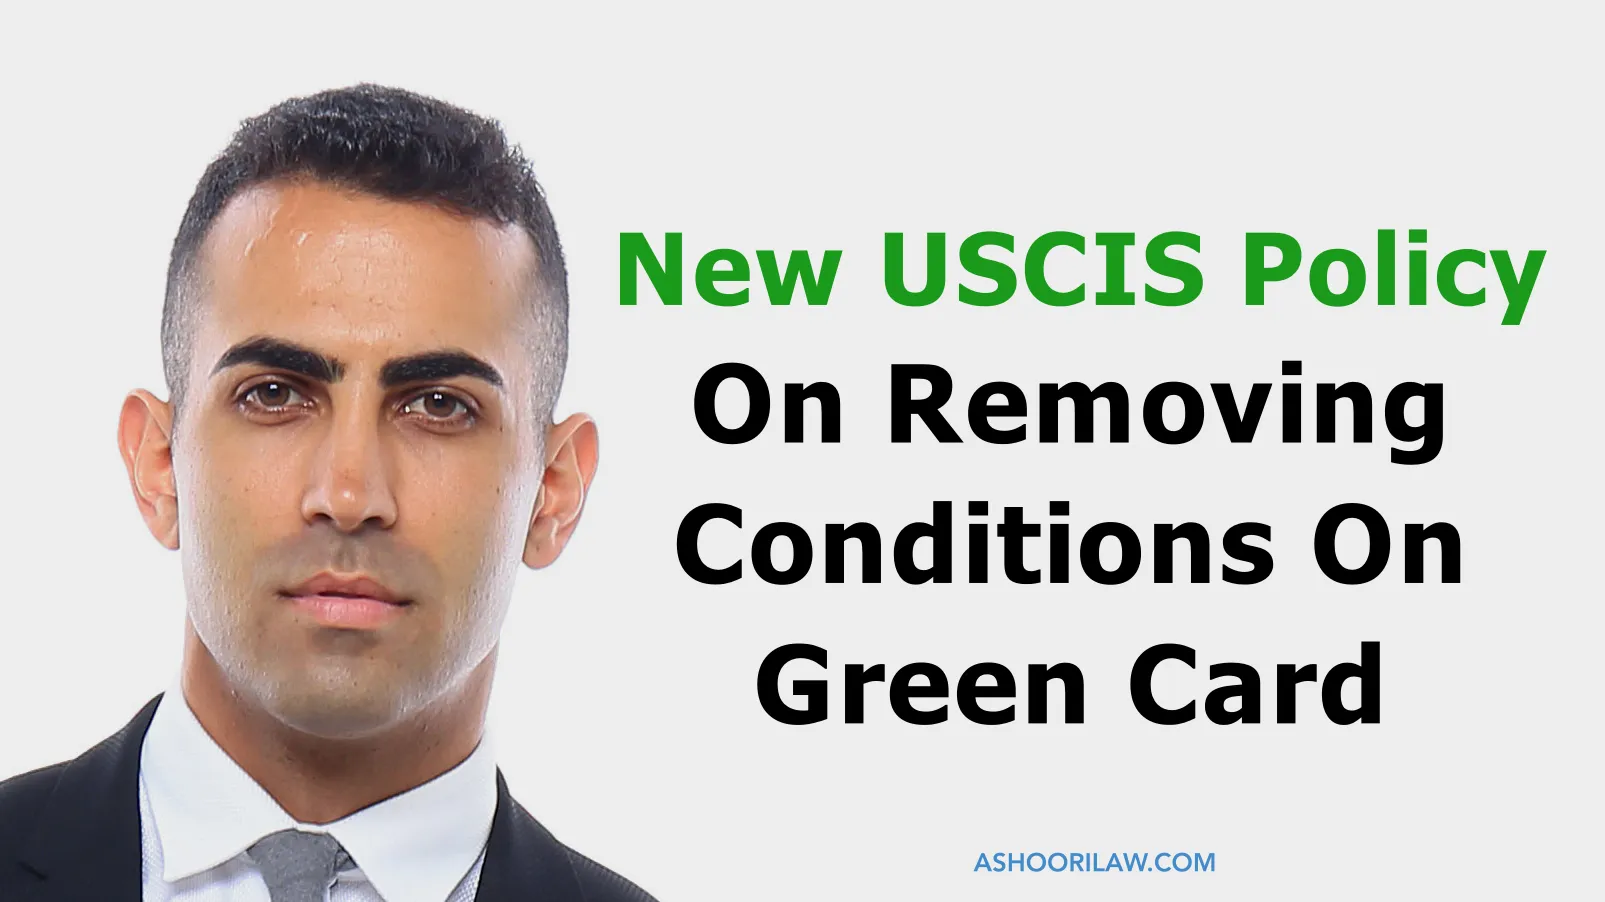 New USCIS Policy on Removing Conditions on Green Card